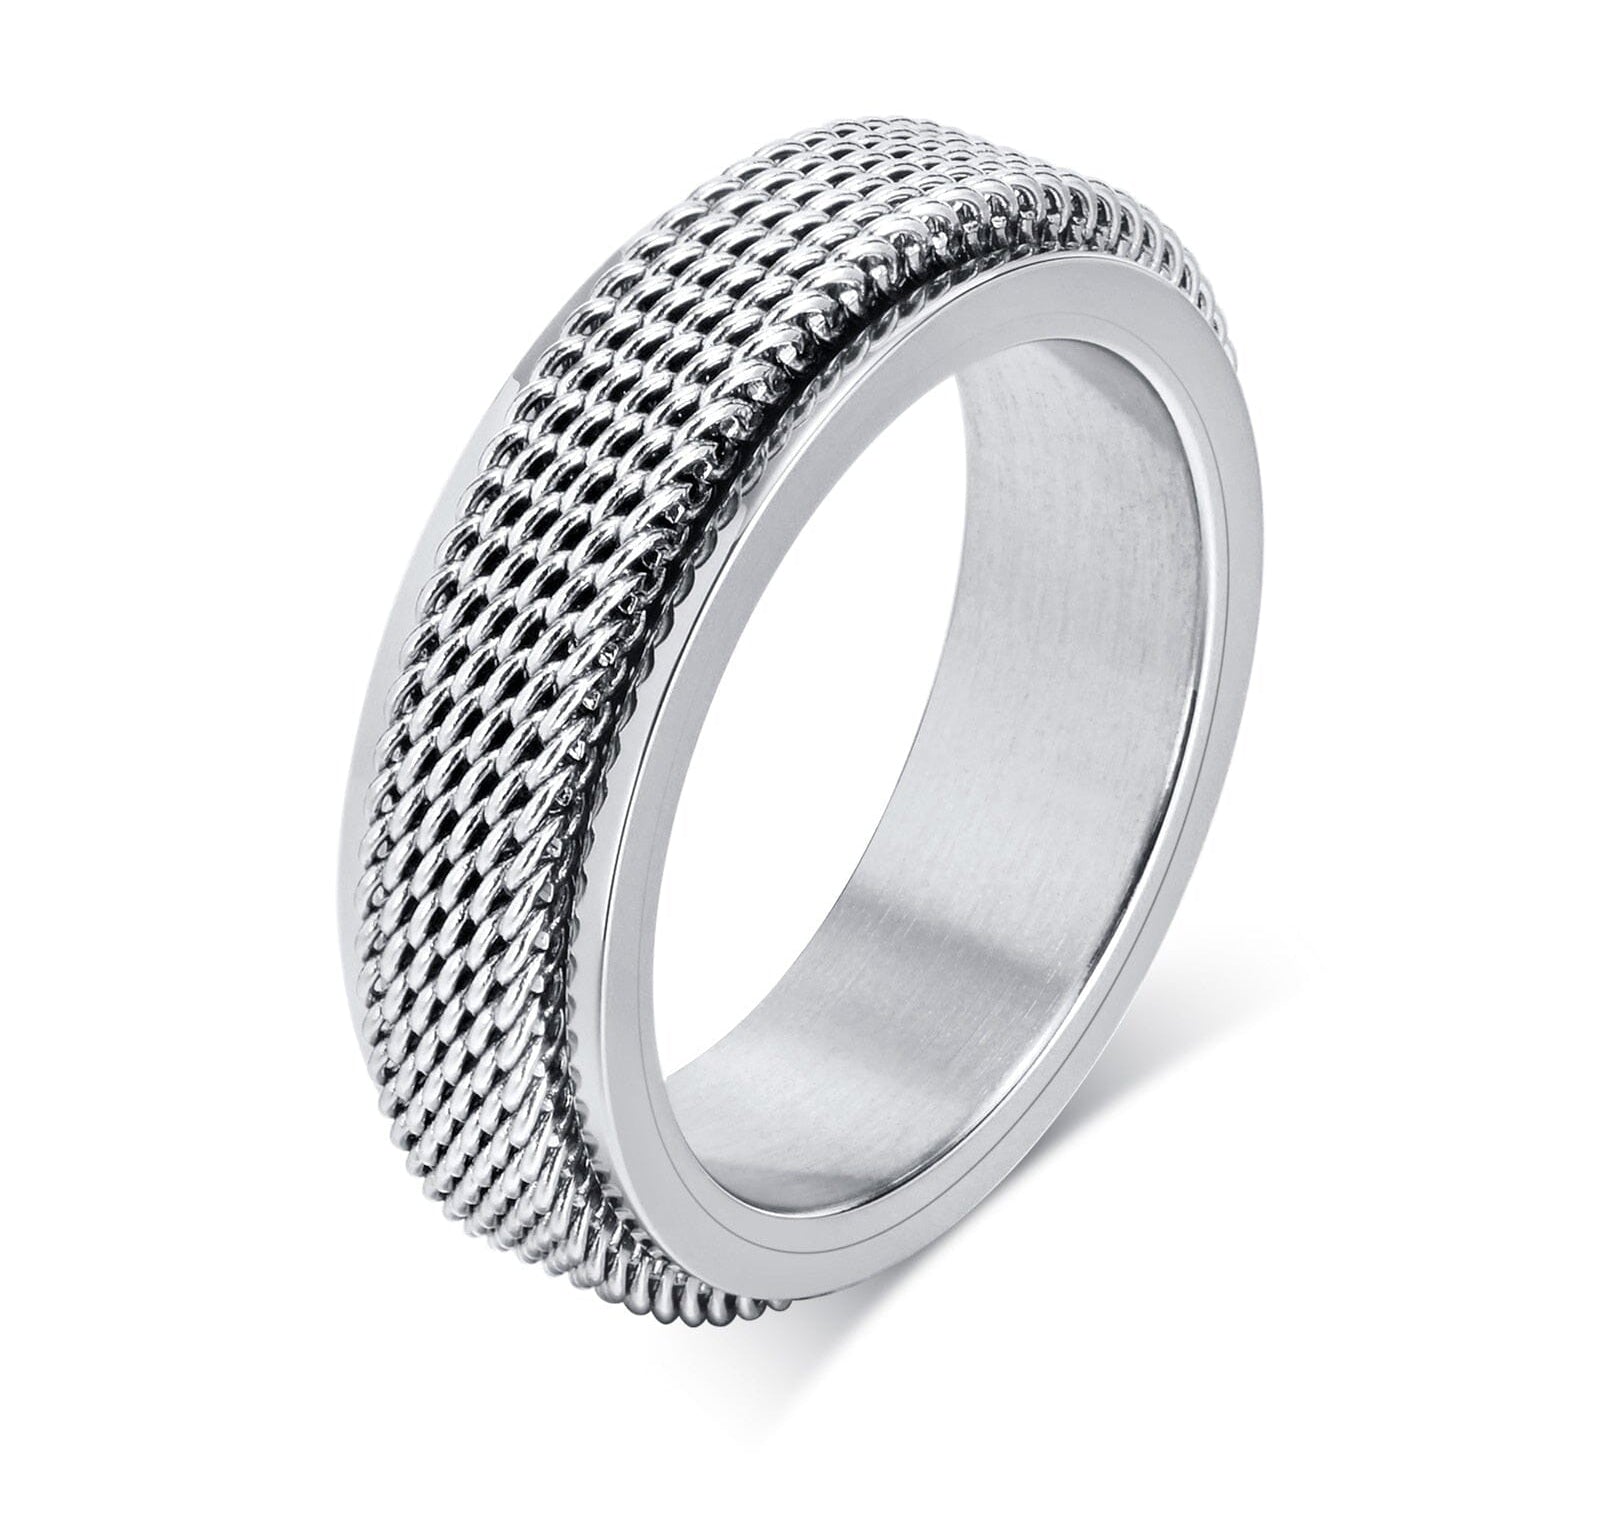 Vnox Waterproof Stainless Steel Metal Spinner Mesh Wedding Band Rings for Men Male Release Stress Gifts Jewelry 0 The Autistic Innovator Silver R-664S 7 